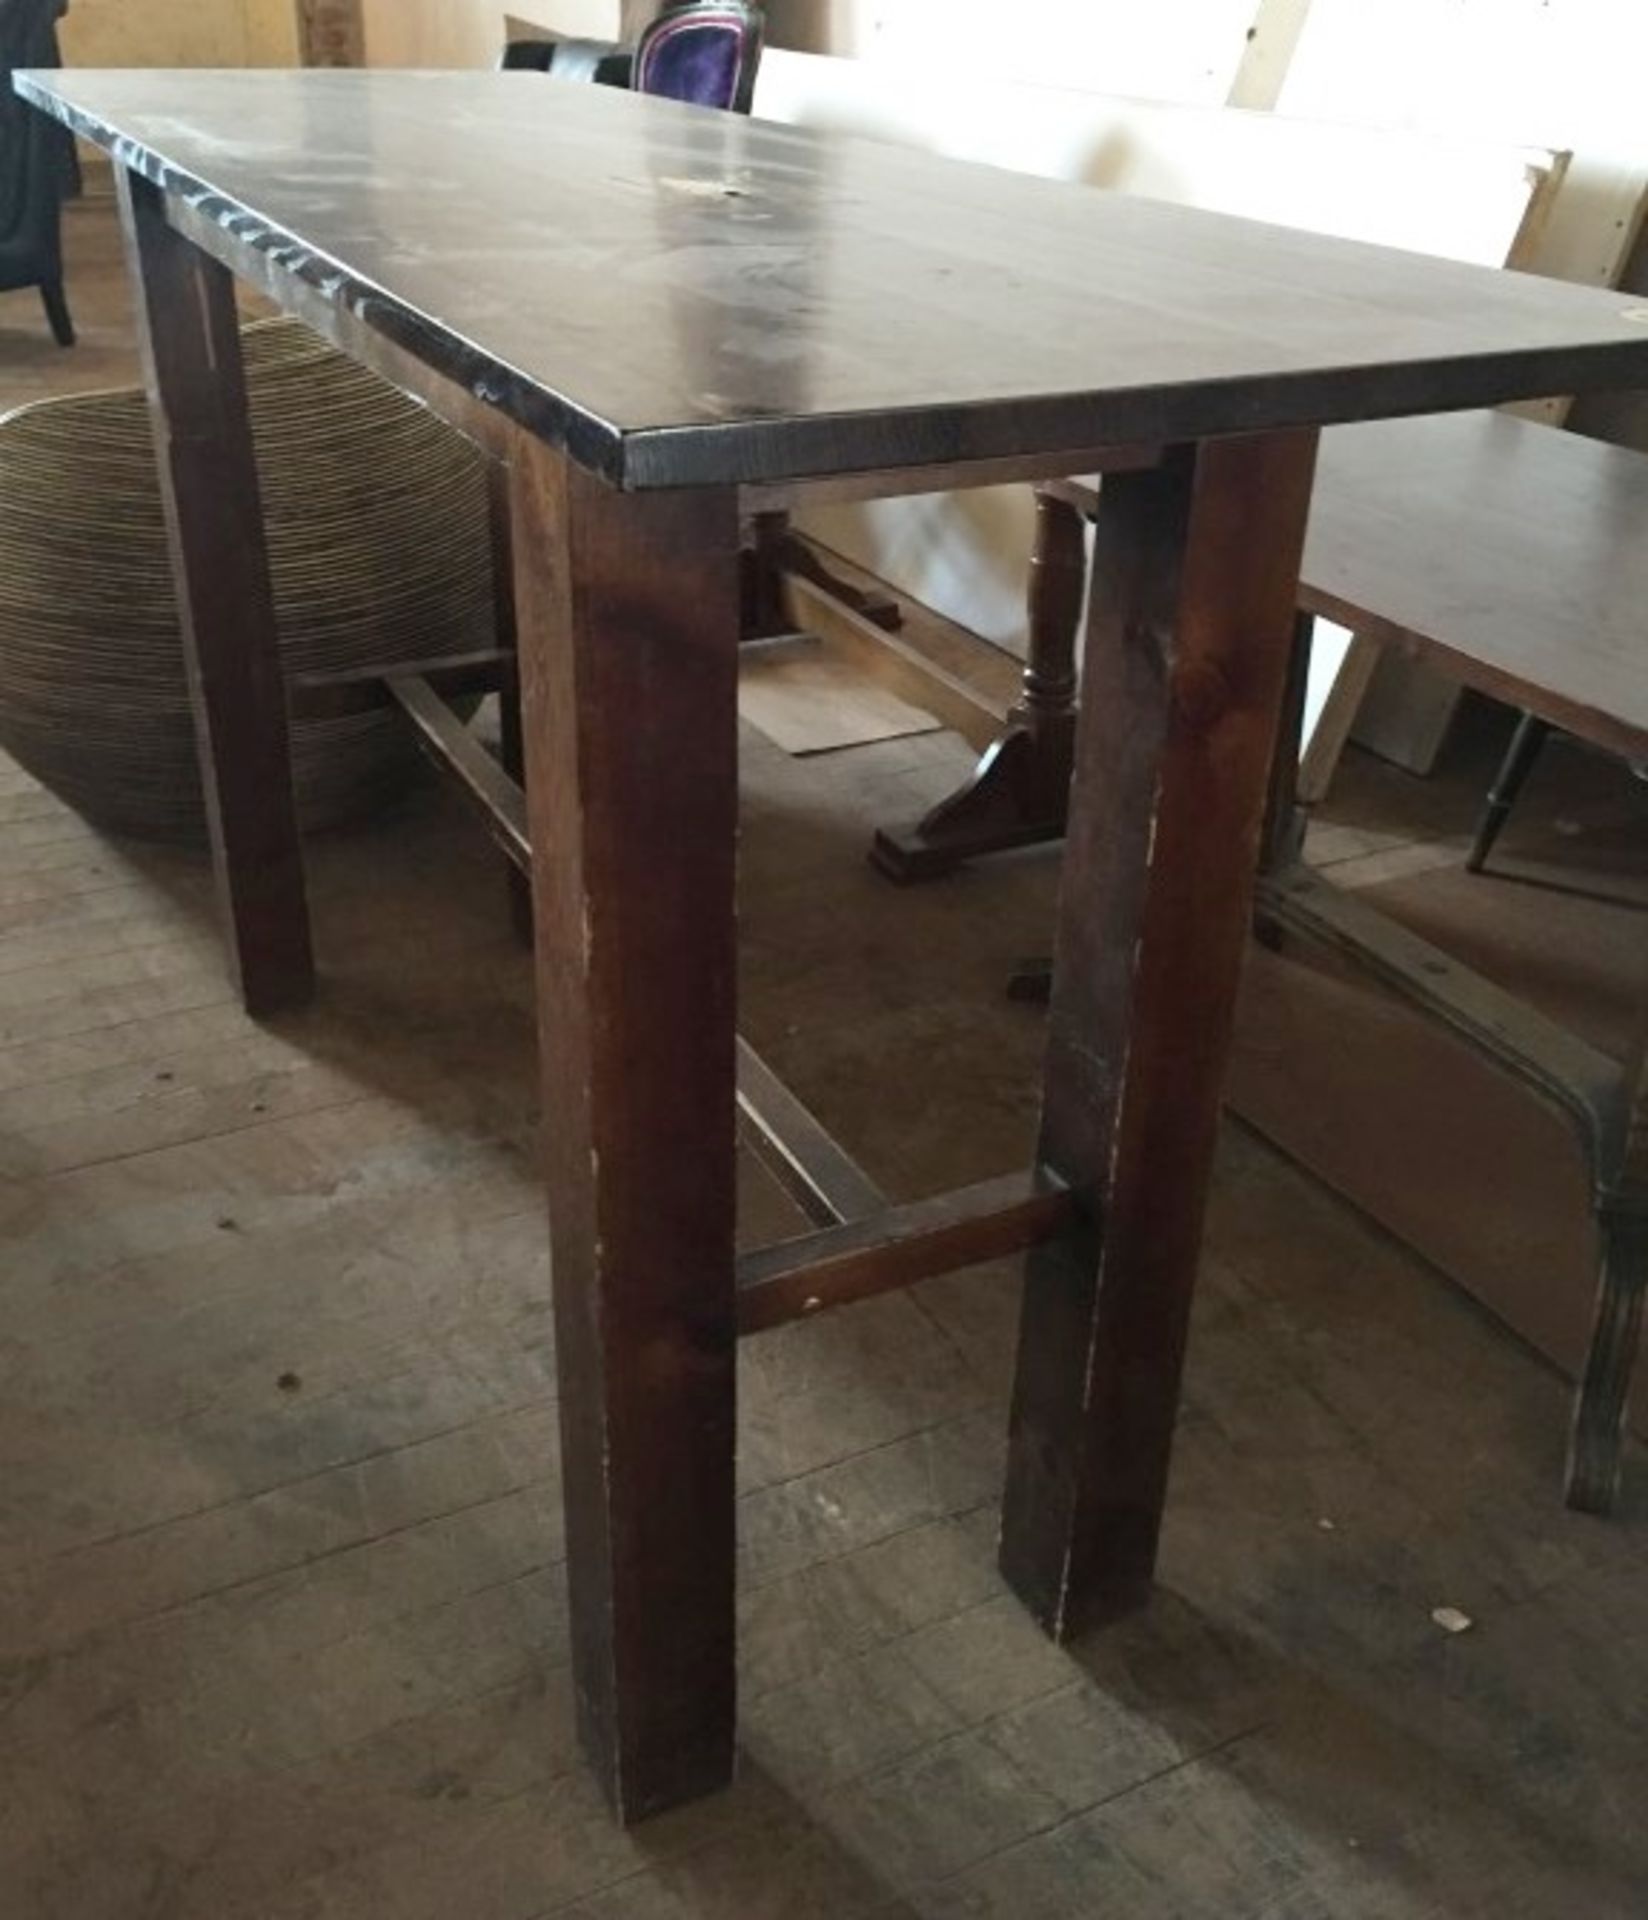 1 x Tall, Sturdy Rectangular Solid Wood Dining Table - Recently Taken From A Bar & Restaurant - Image 3 of 8